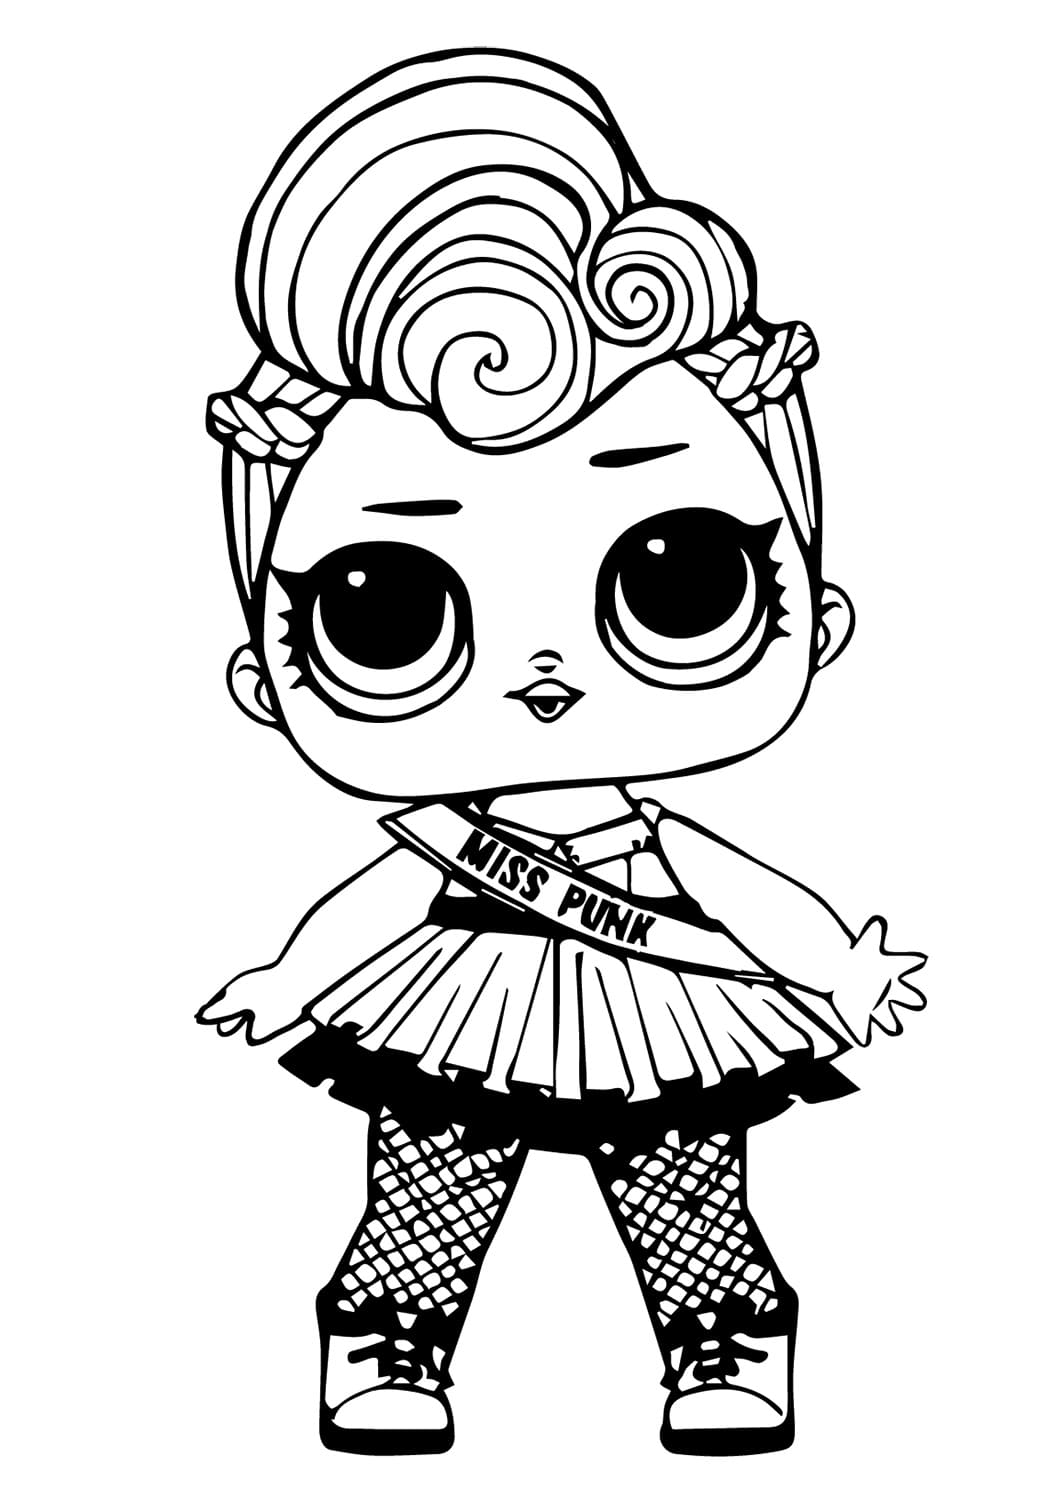 Miss Punk LOL coloring page